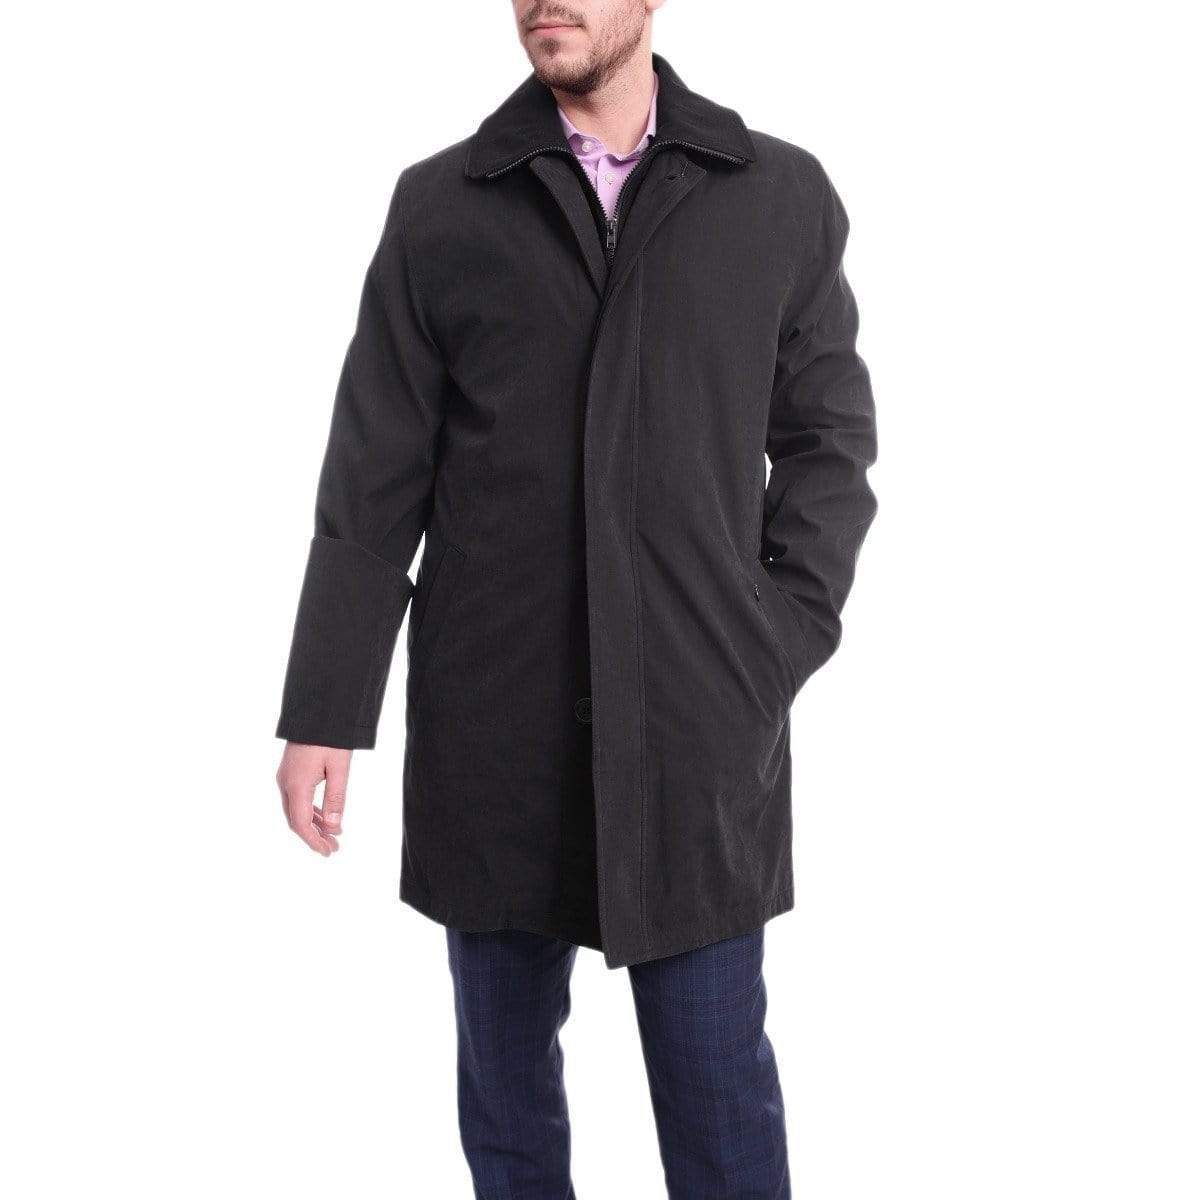 Cianni Cellini Dress Coats 36S Men&#39;s Rain-proof Iconic Black Trench Coat Jacket With Removable Liner